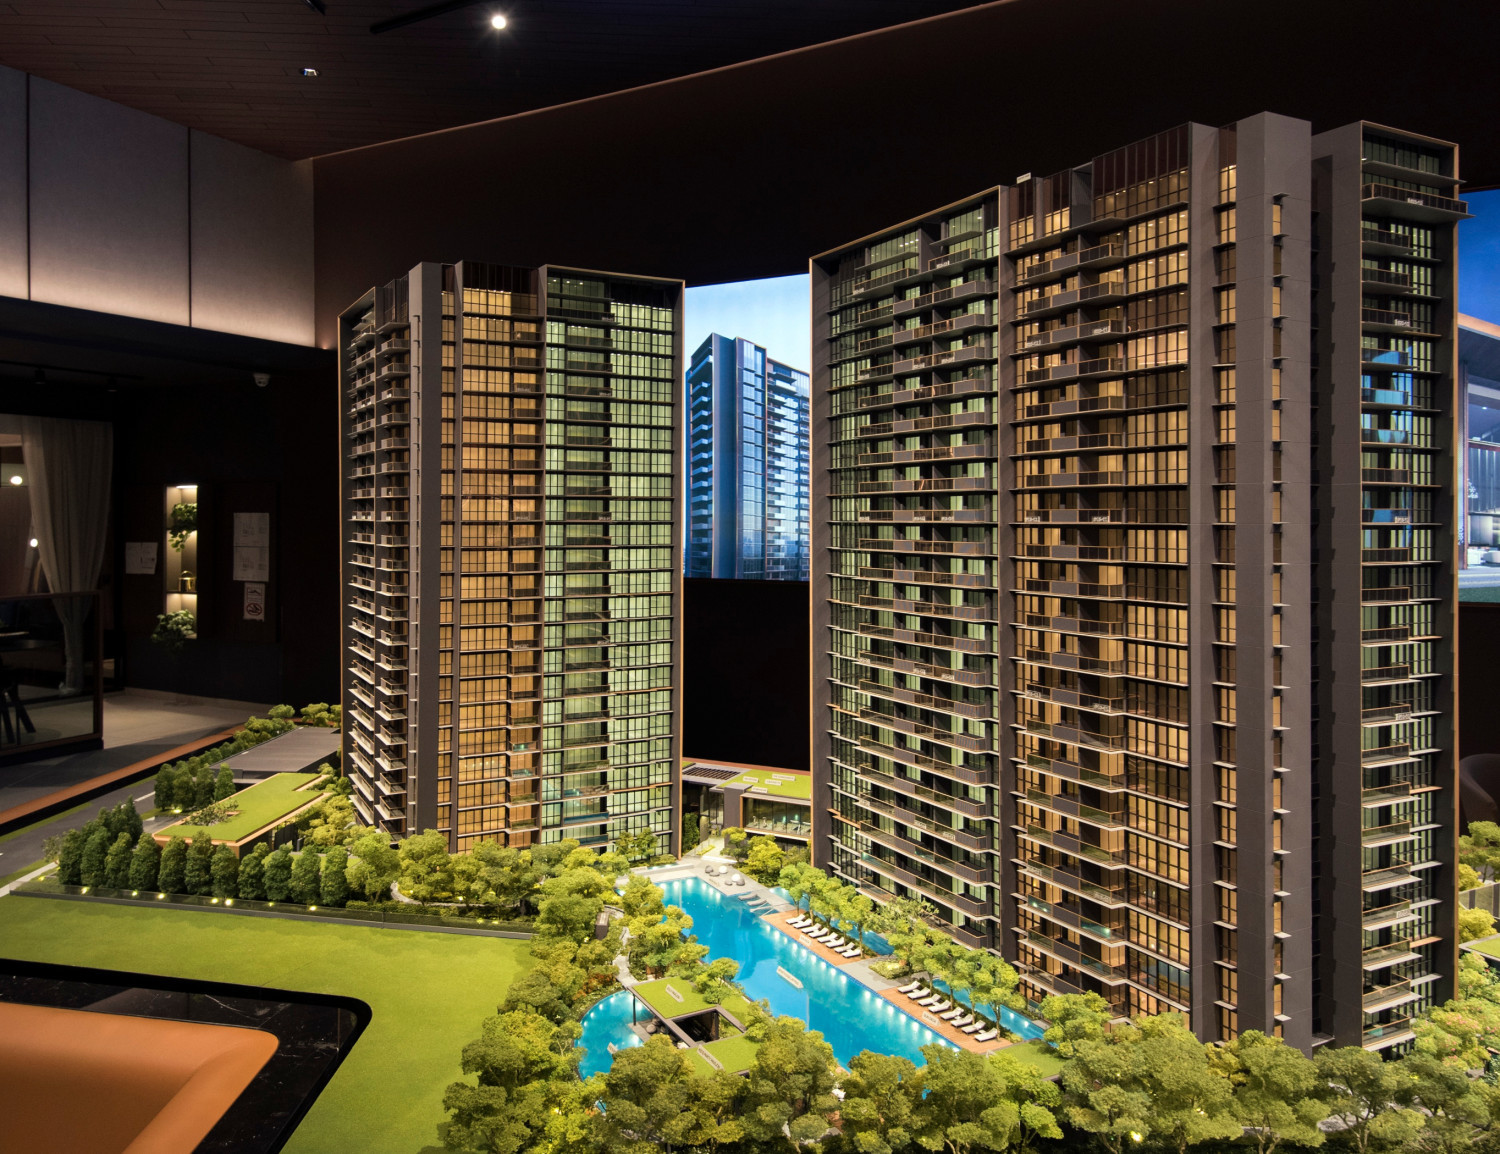 Kopar at Newton: Well-positioned to leverage growth plans for Newton and Novena - Property News